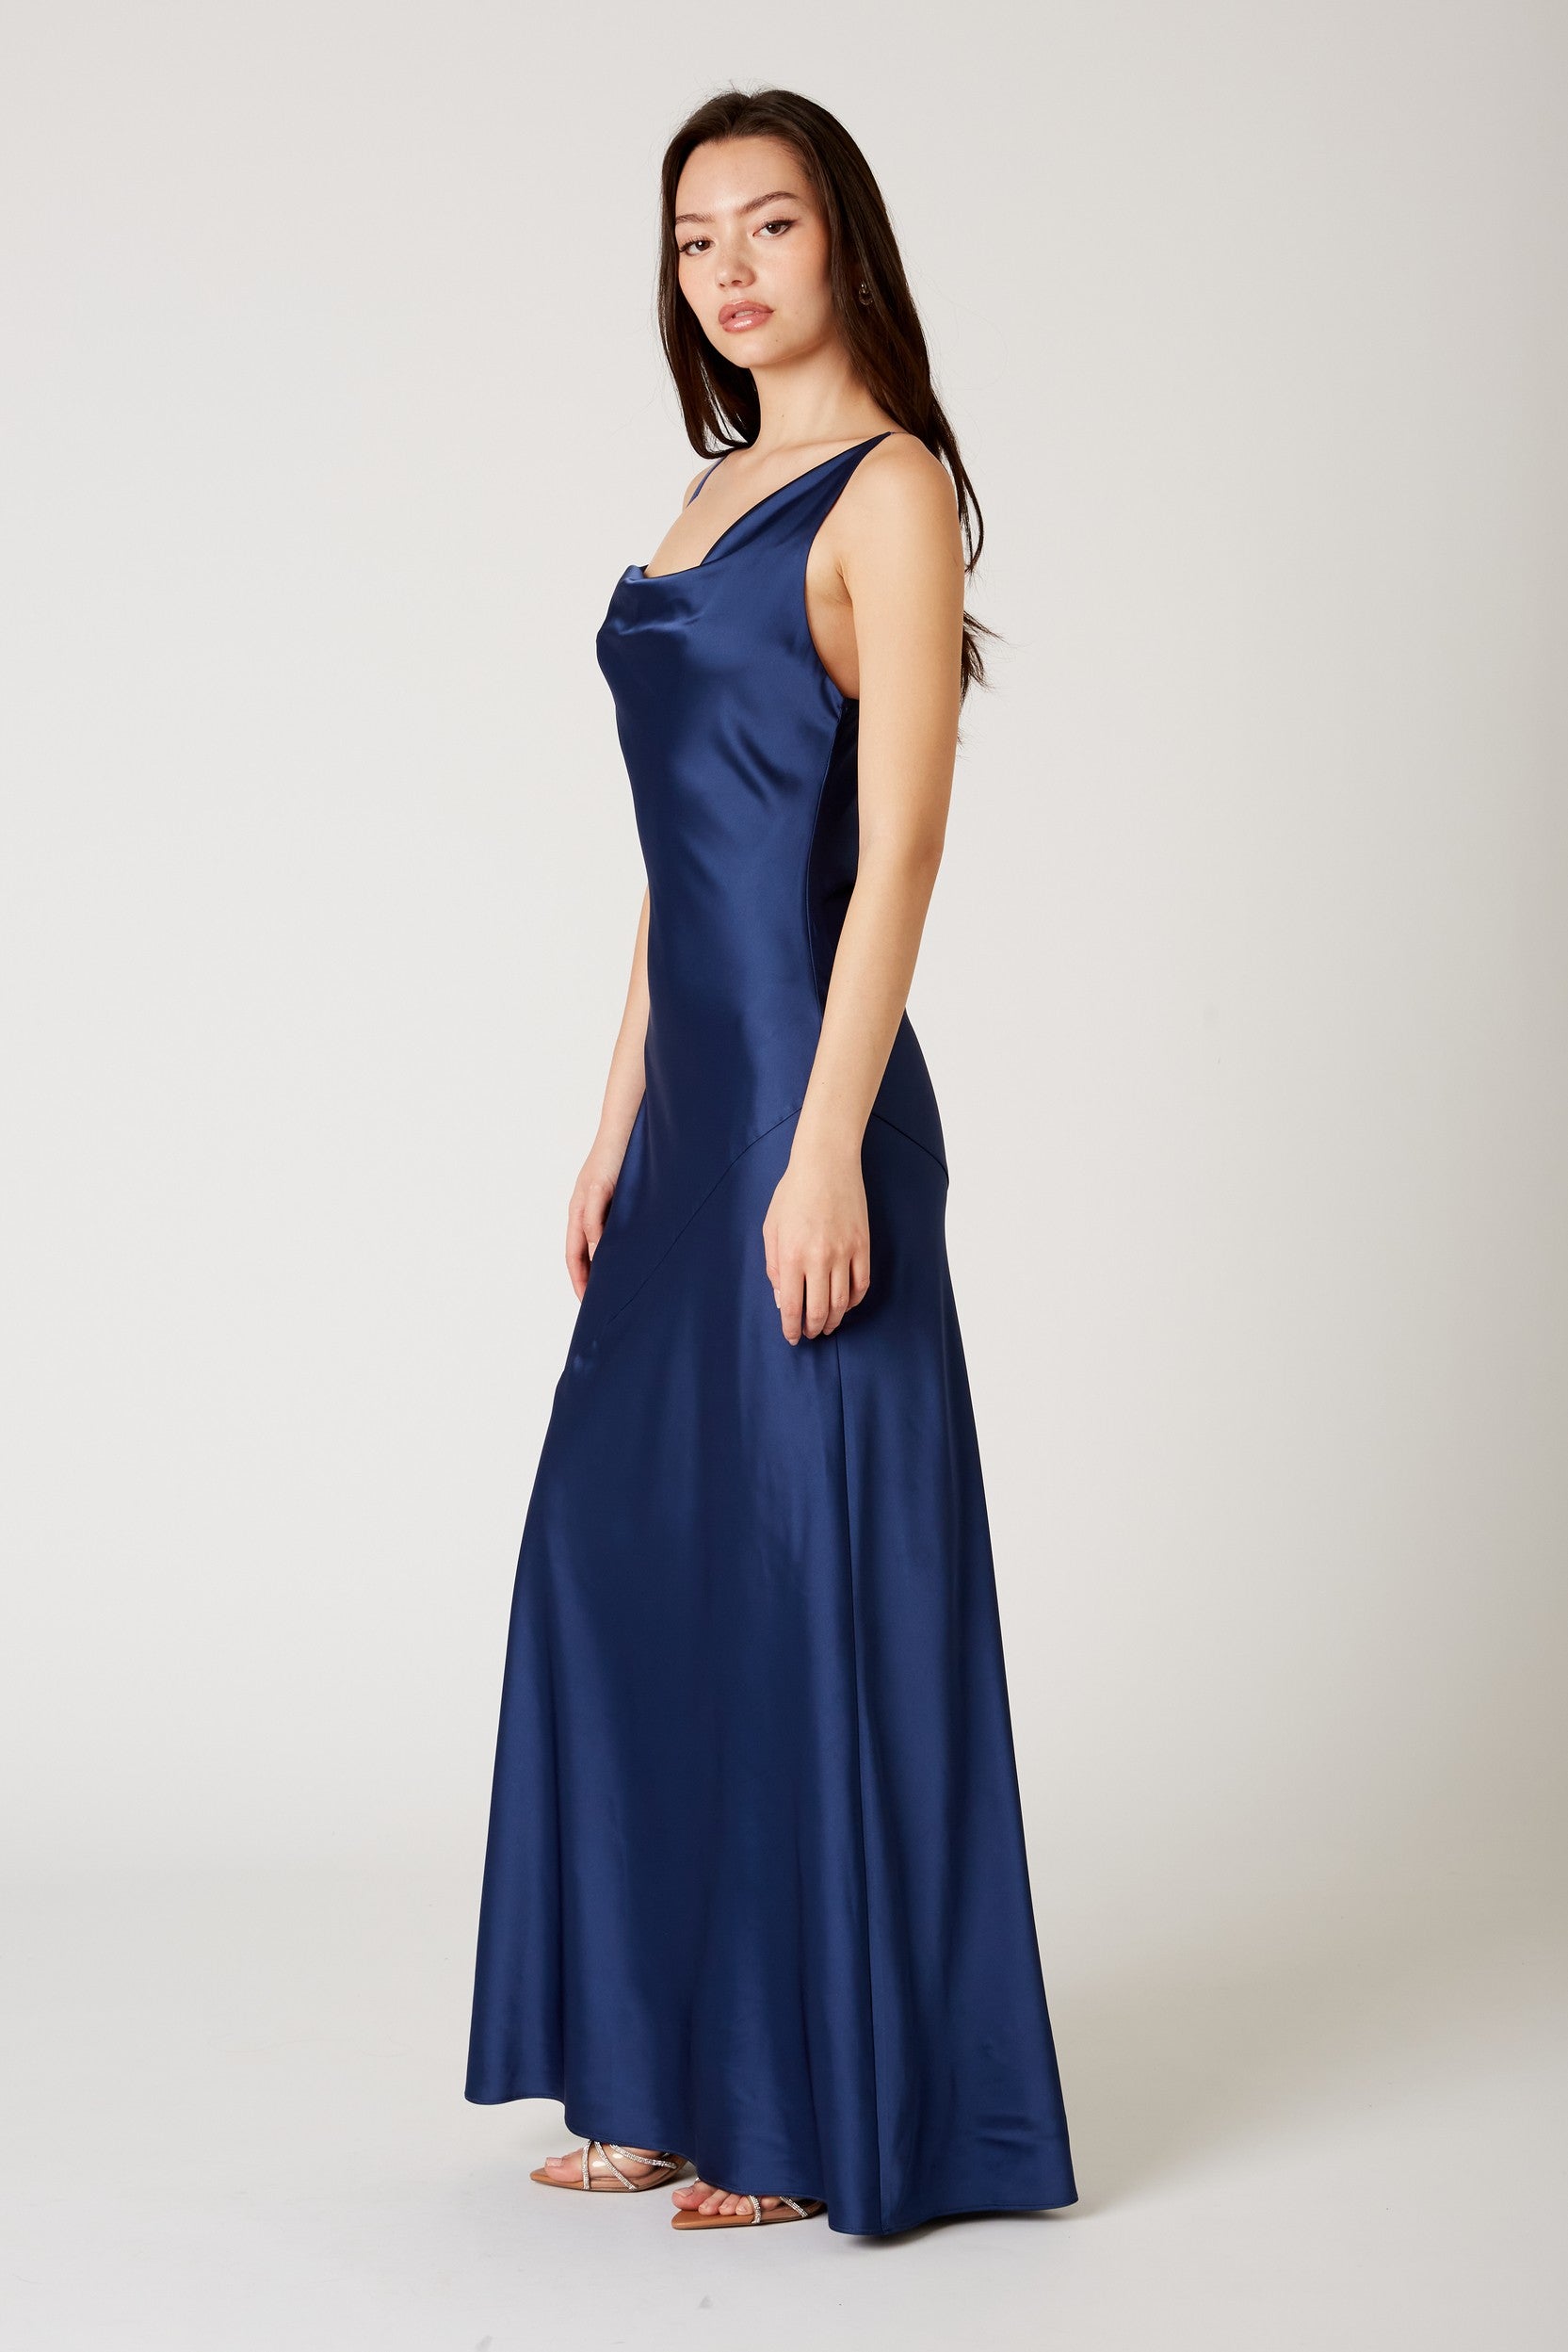 Navy Satin Maxi Dress | Collective Request 